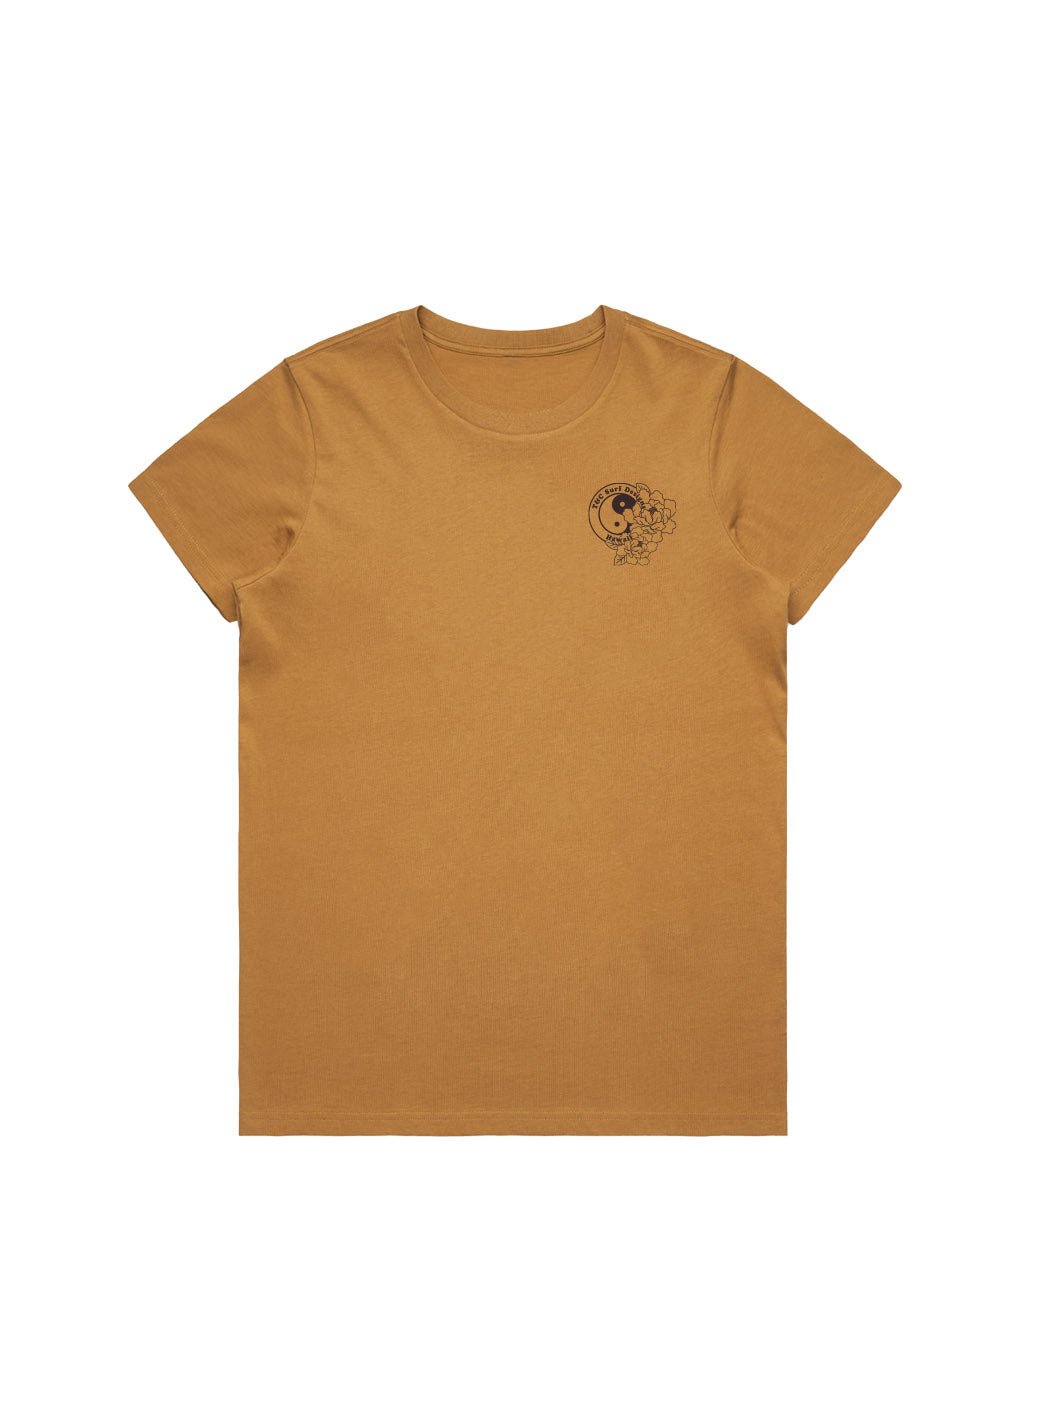 T&C Surf Designs T&C Surf Year of the Dragon 2 Maple Tee, 